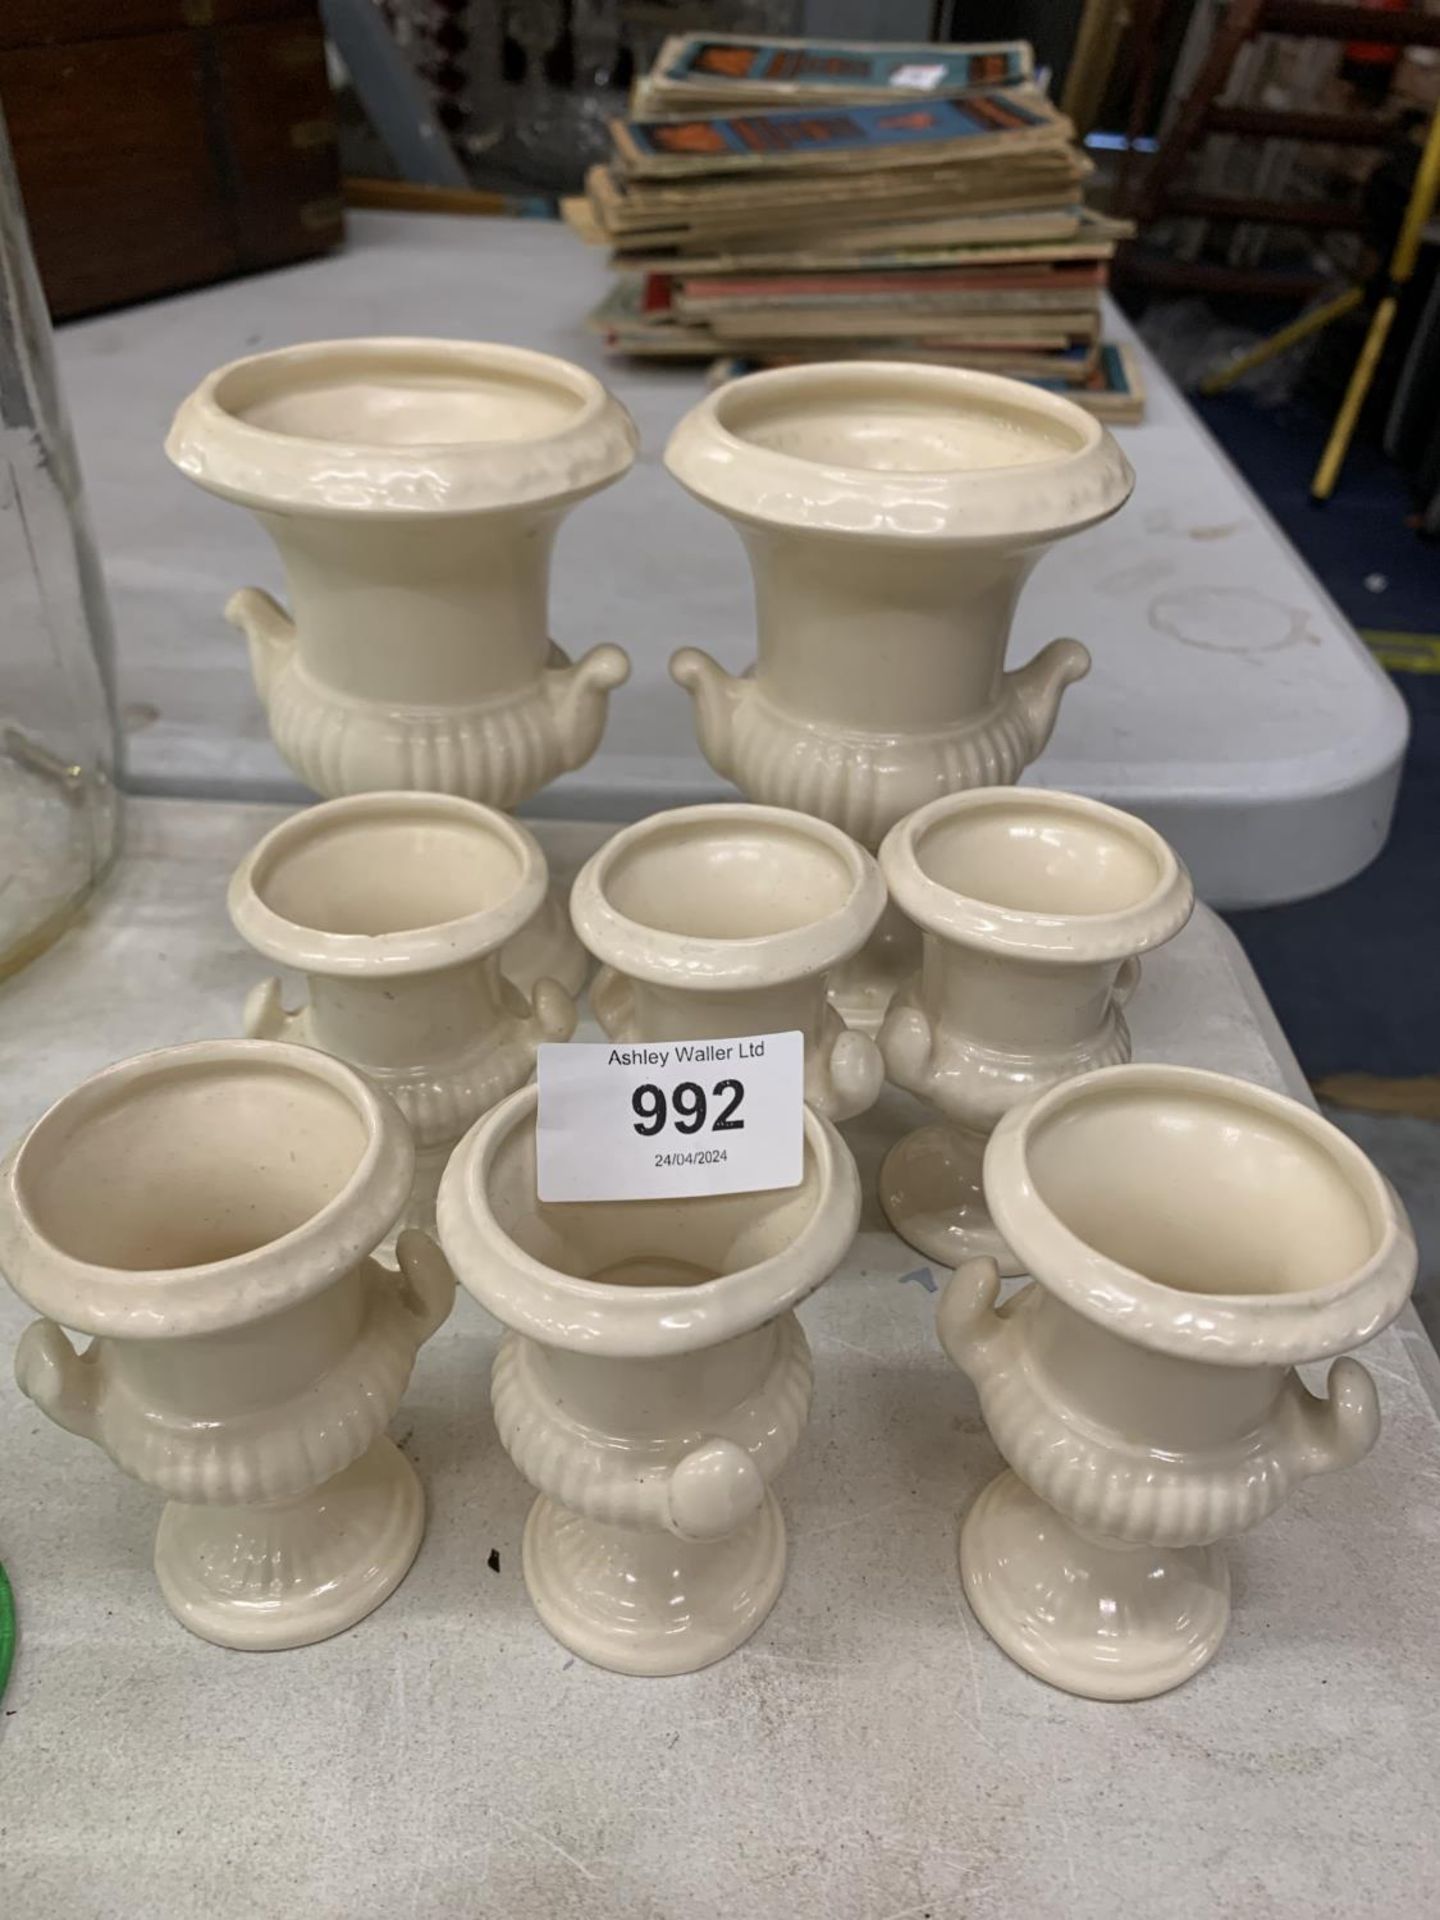 EIGHT DARTMOUTH POTTERY URNS TO INCLUDE TWO MEDIUM AND SIX SMALL